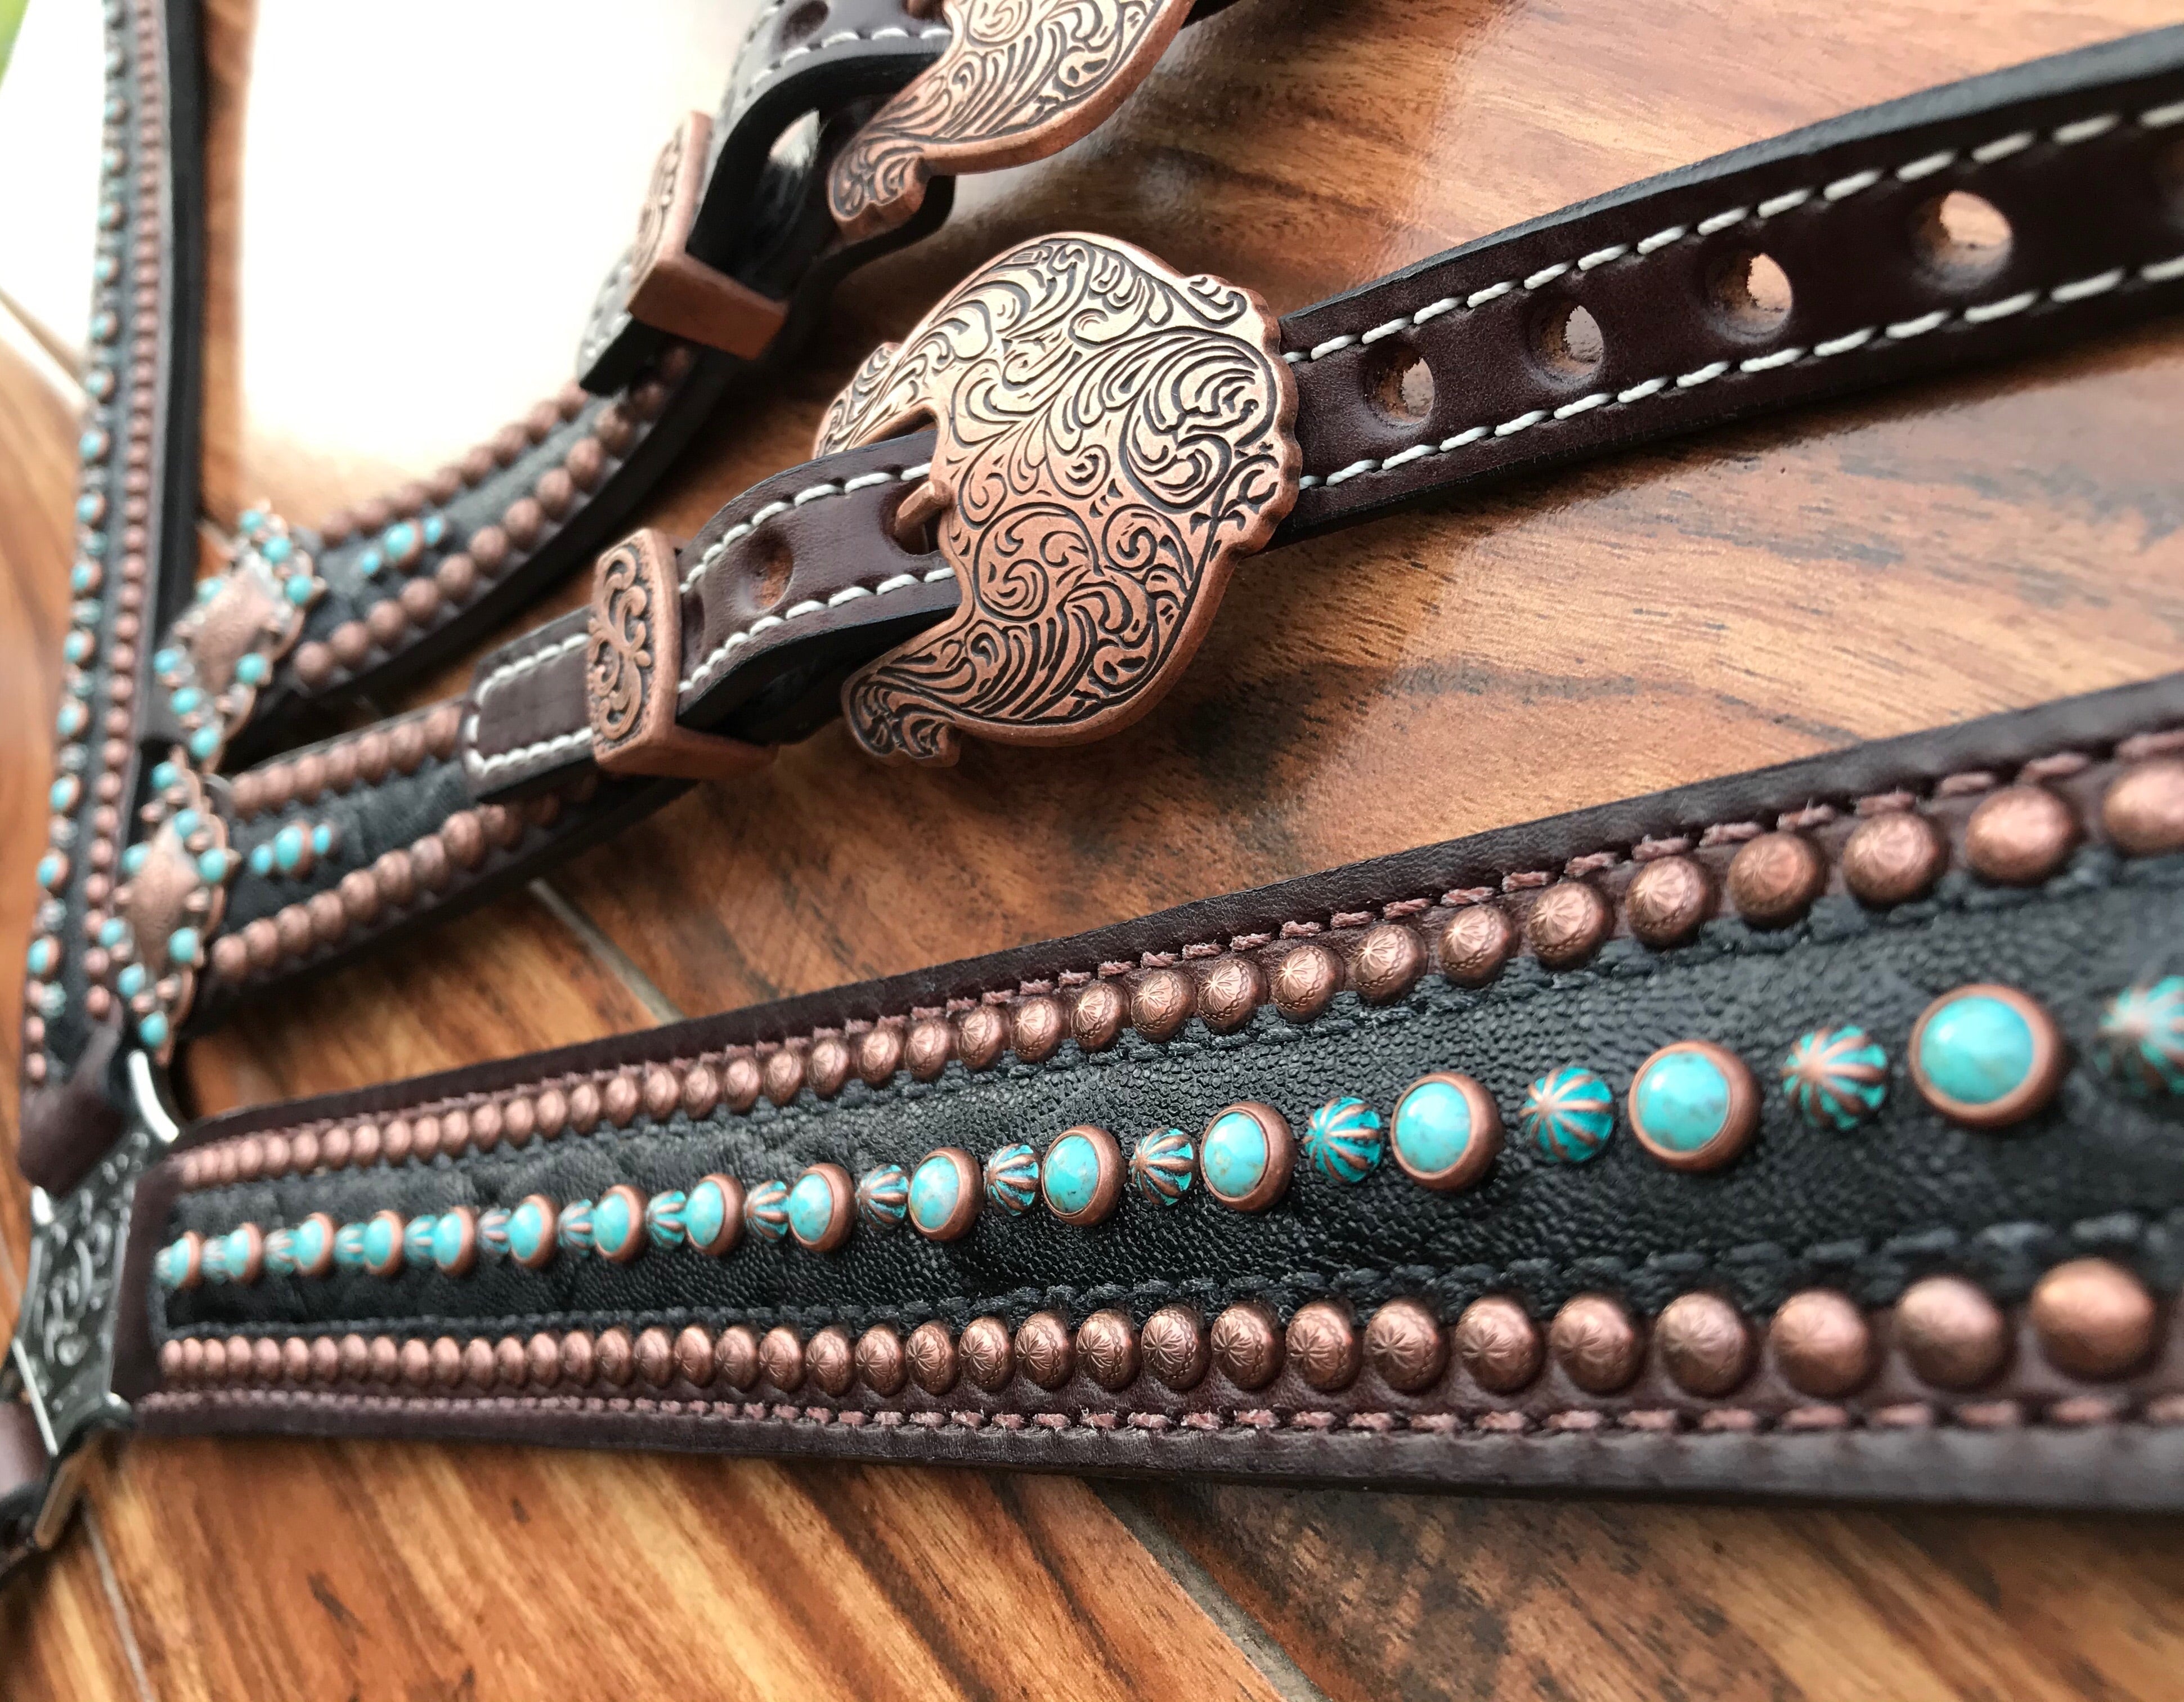 Black gator with patina and turquoise